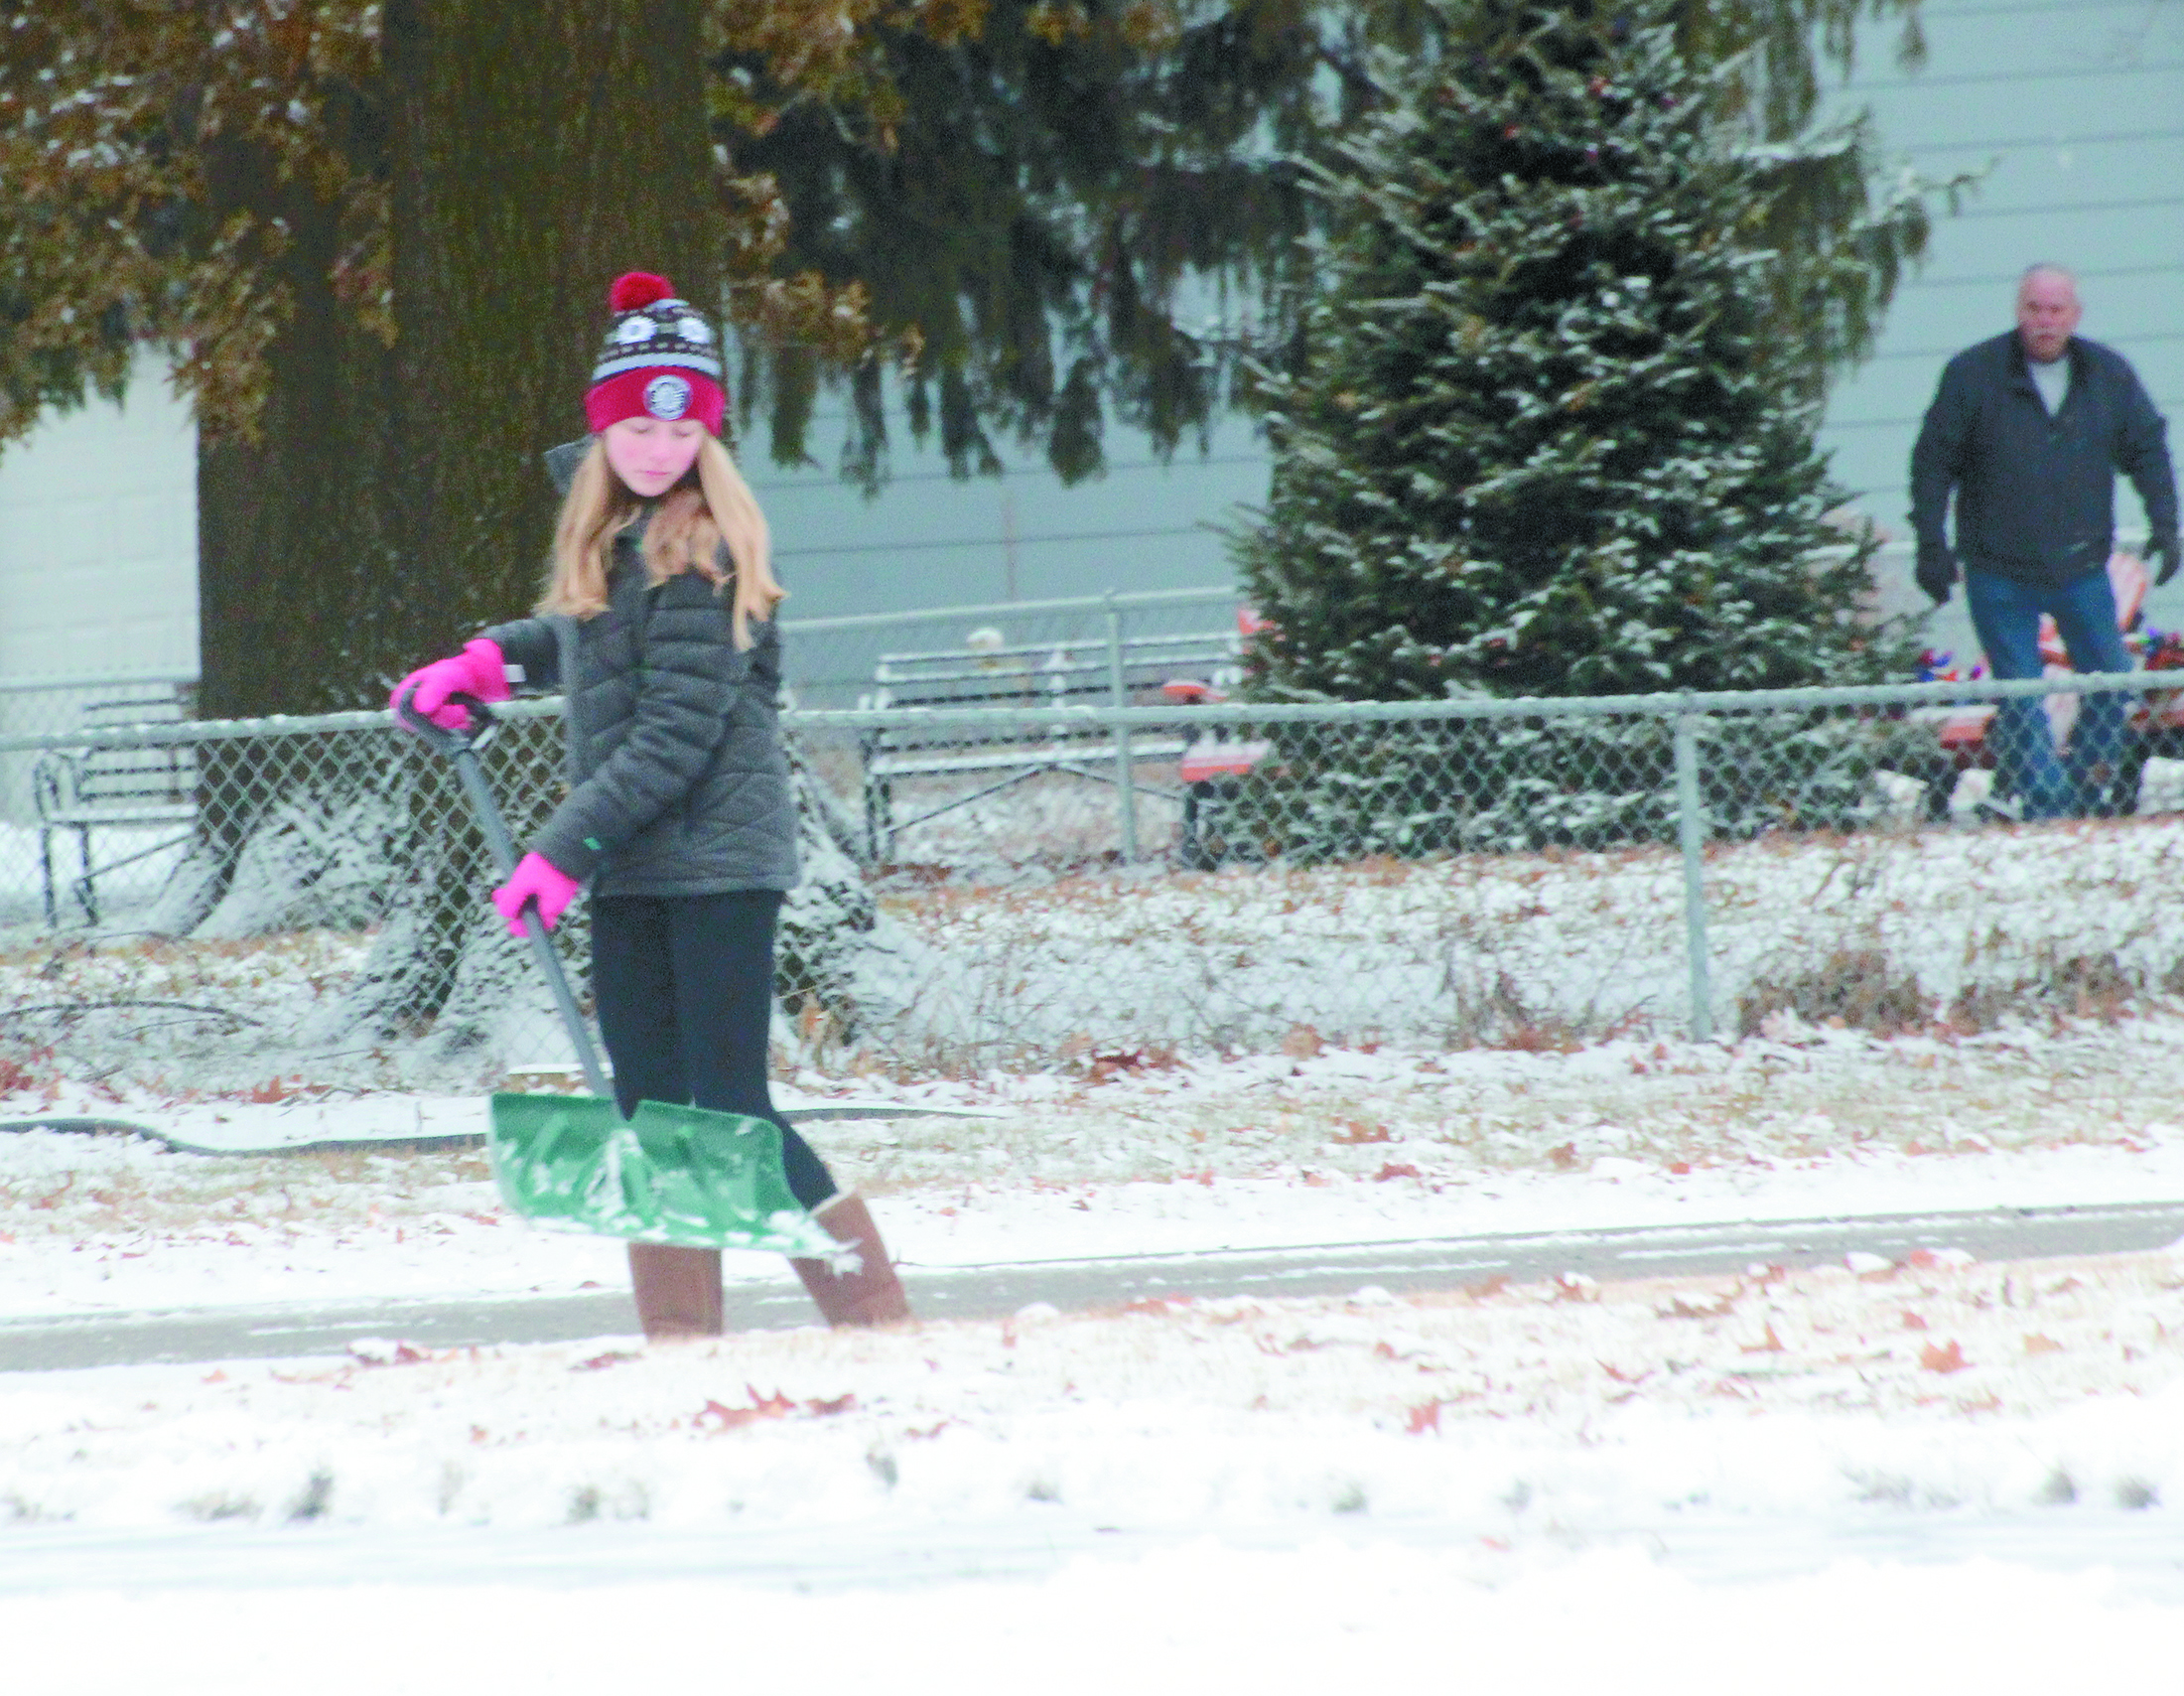 Snow arrives too late for White Christmas